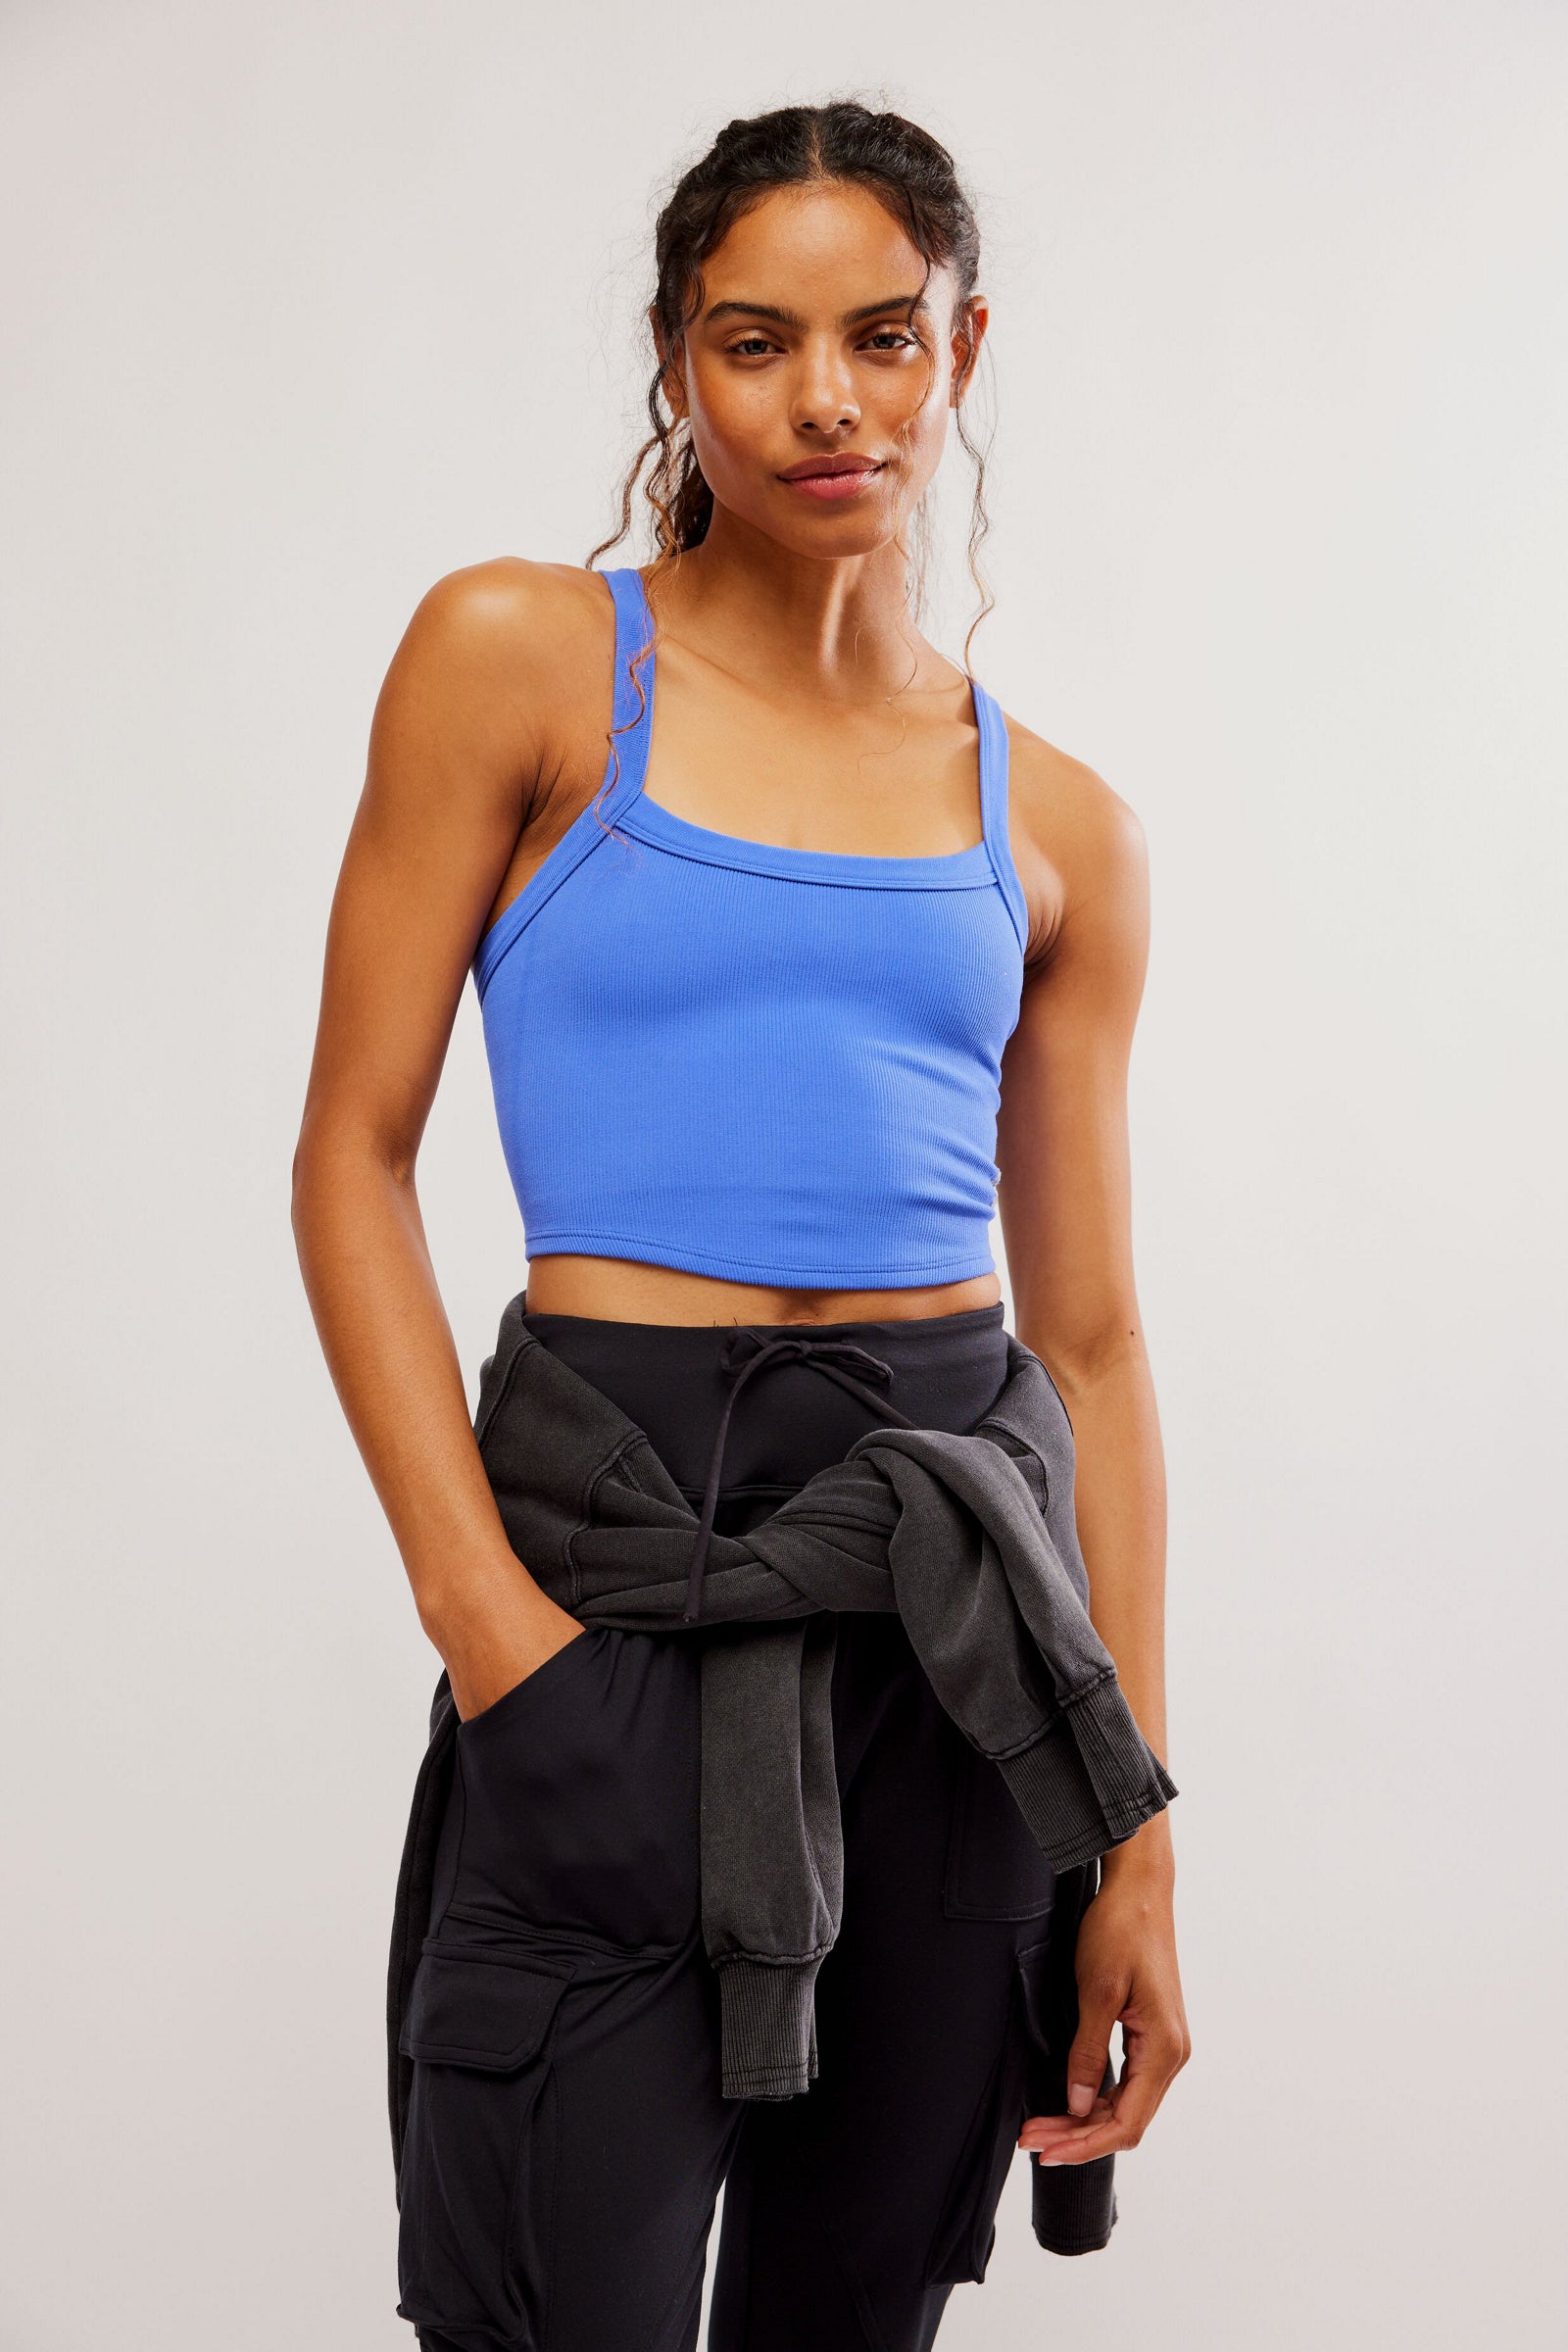 All Clear Cami | Free People Movement